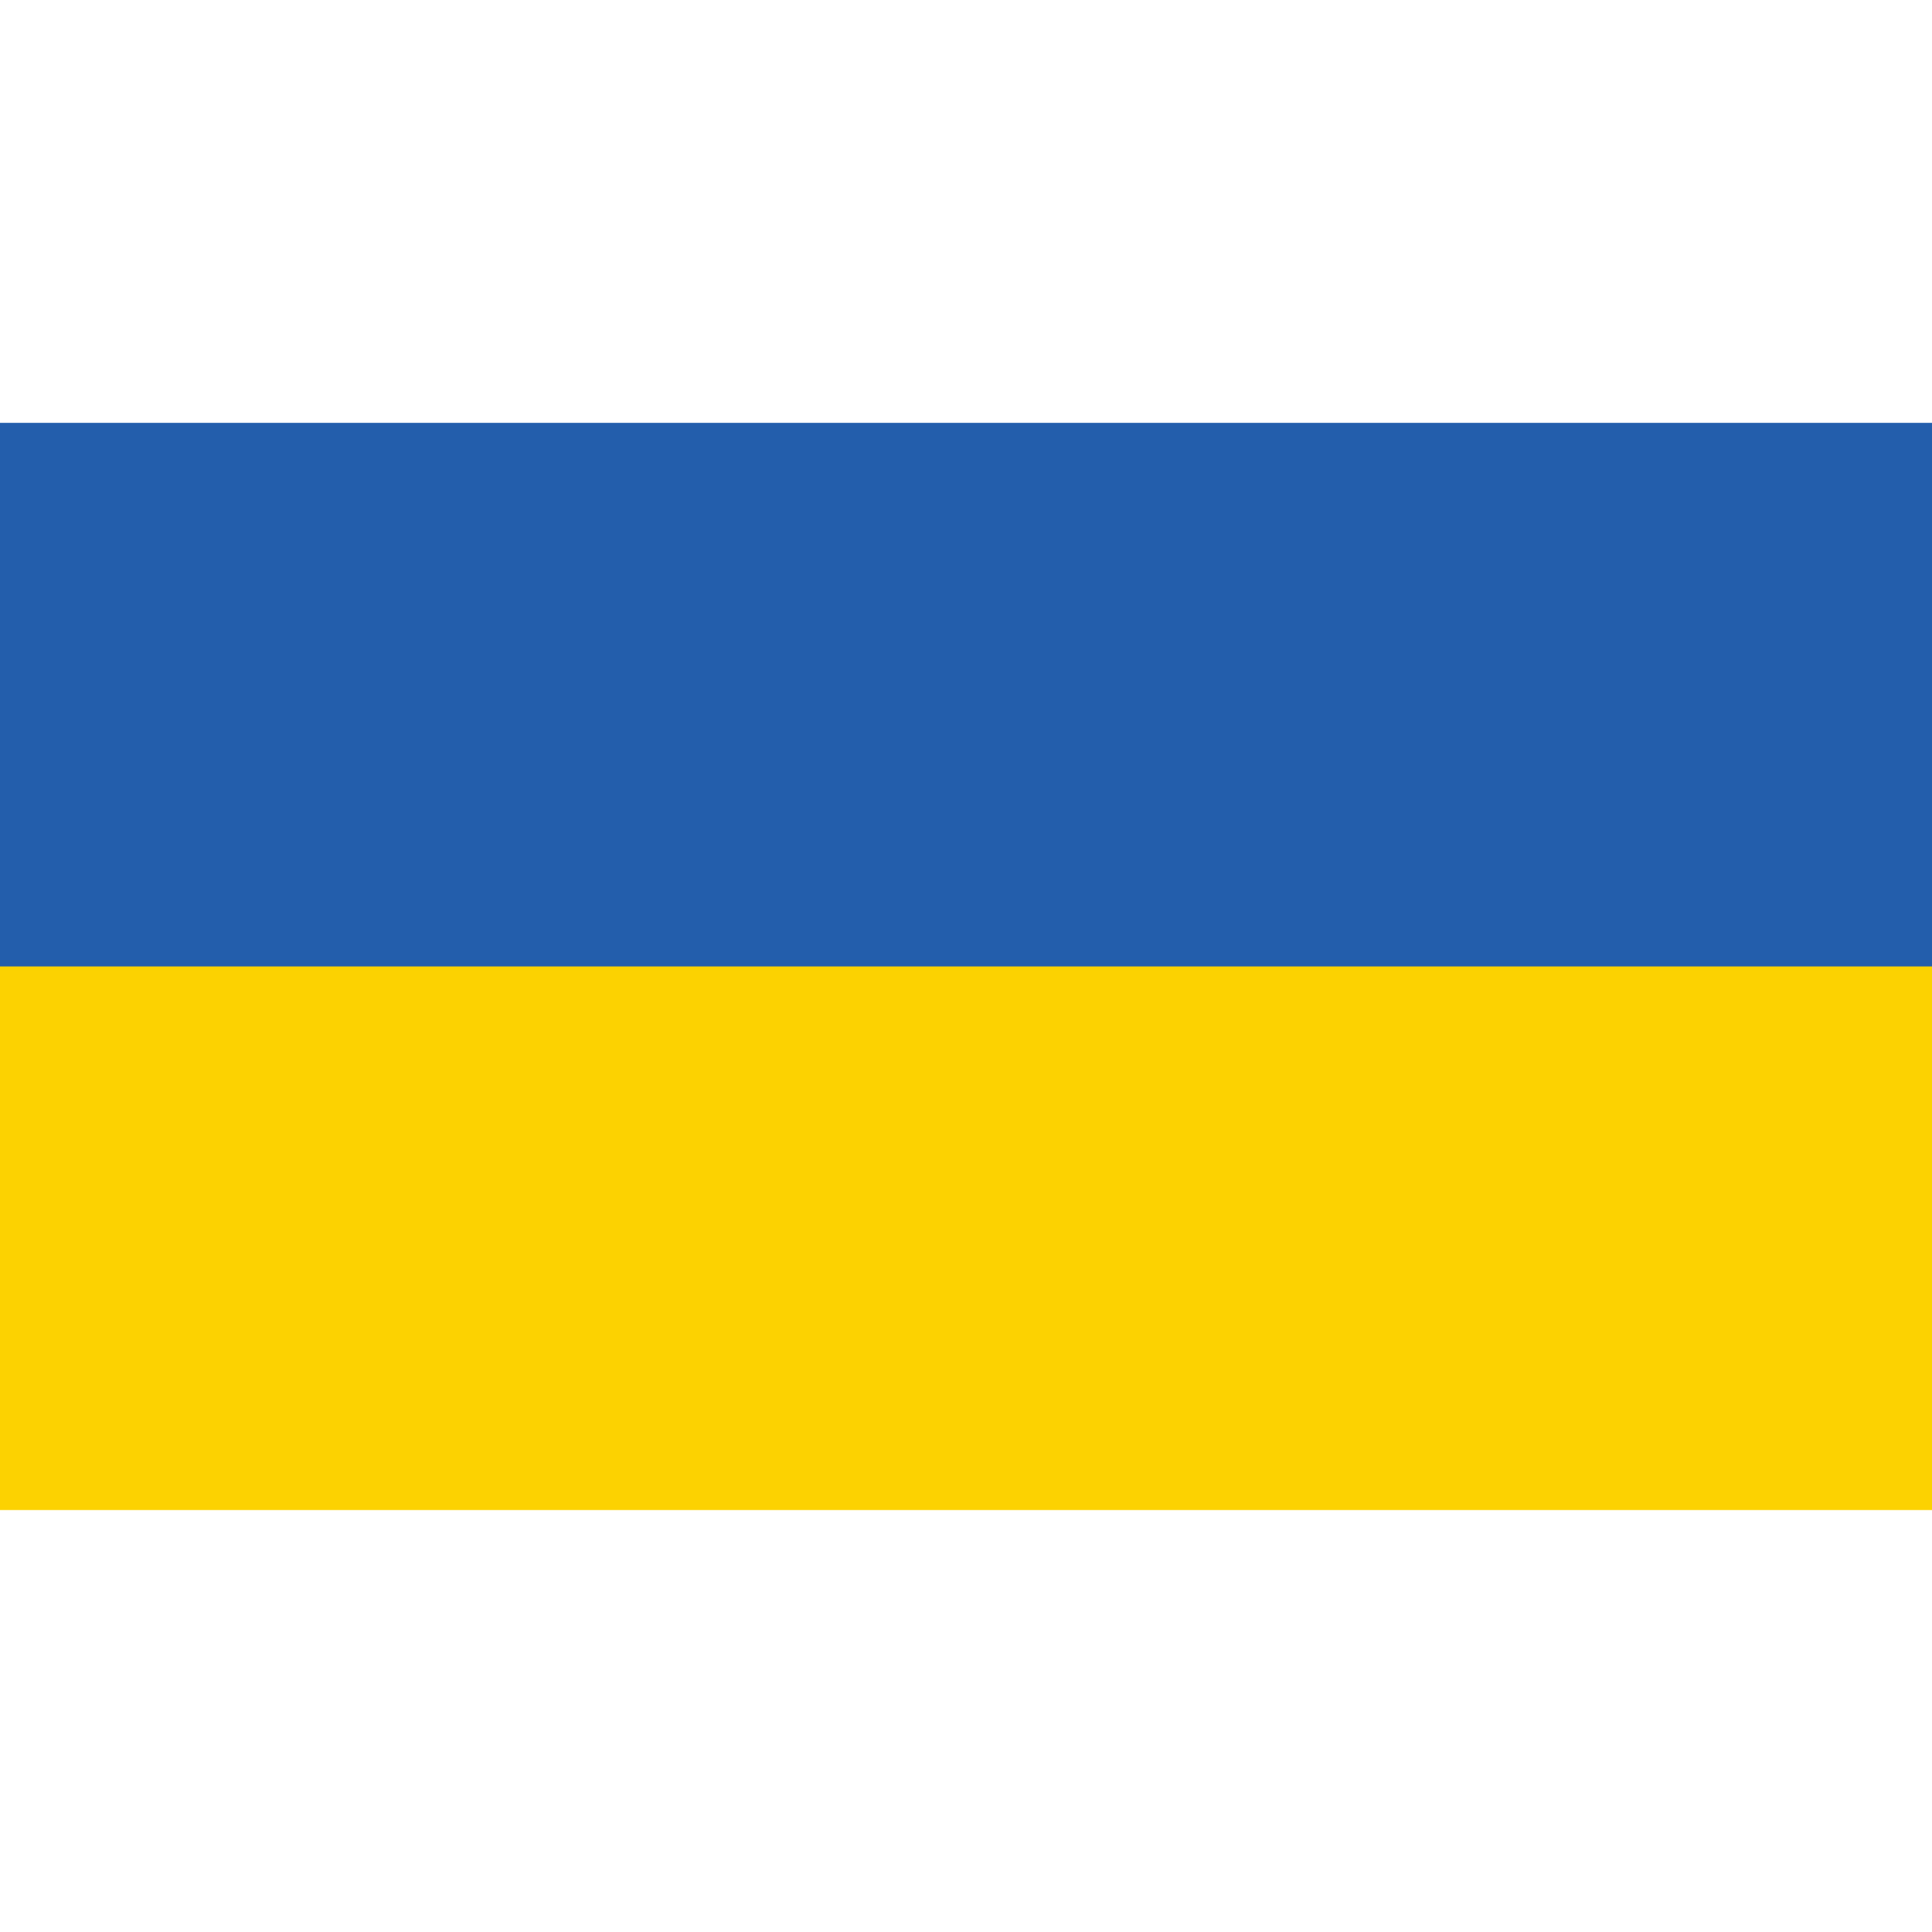 The Ukrainian flag has two equally sized horizontal stripes in blue and yellow.